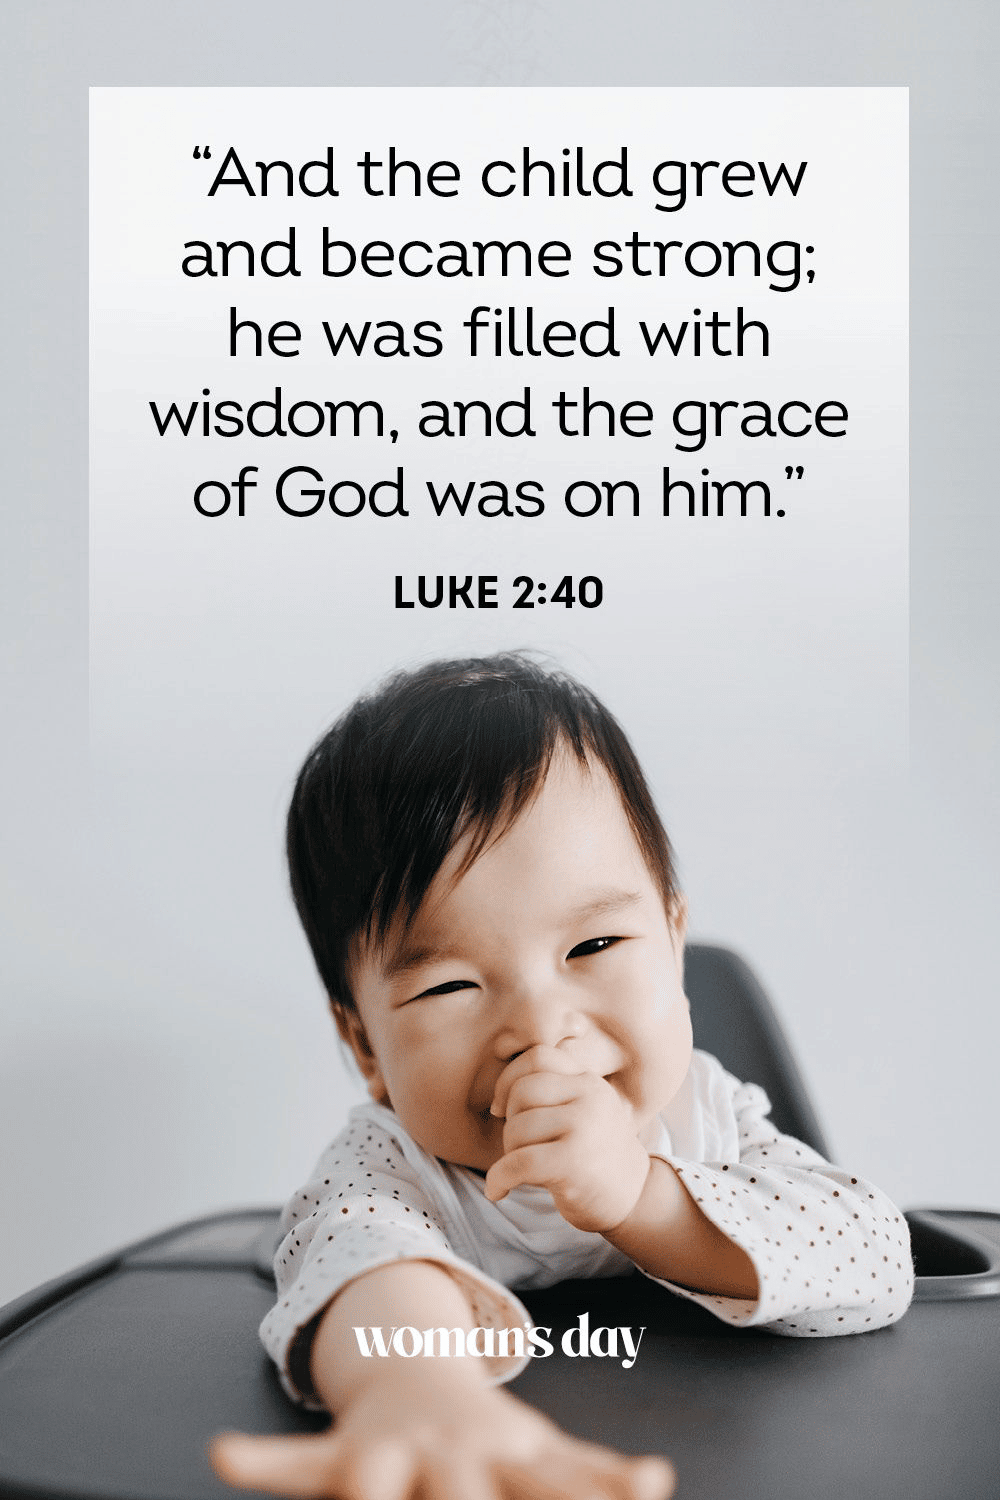 “And the child grew, and became strong; he was filled with wisdom and the grace of God was on him.” - Luke 2:40